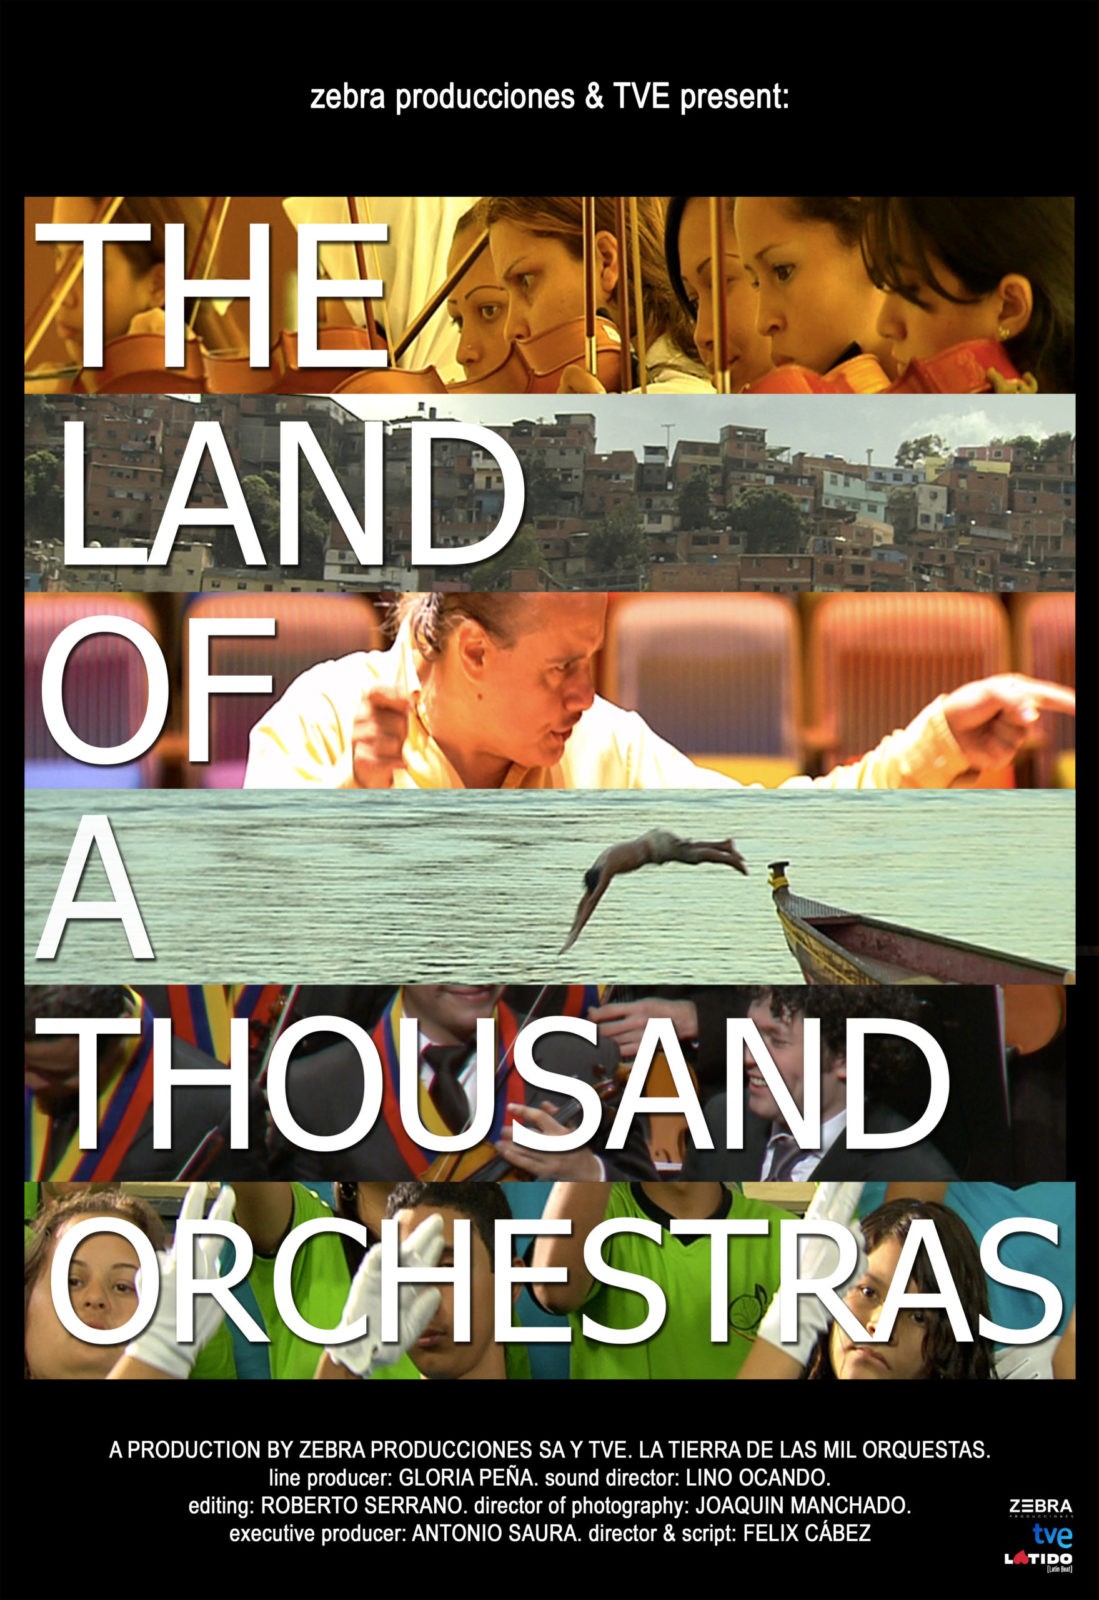 THE LAND OF A THOUSAND ORCHESTRAS